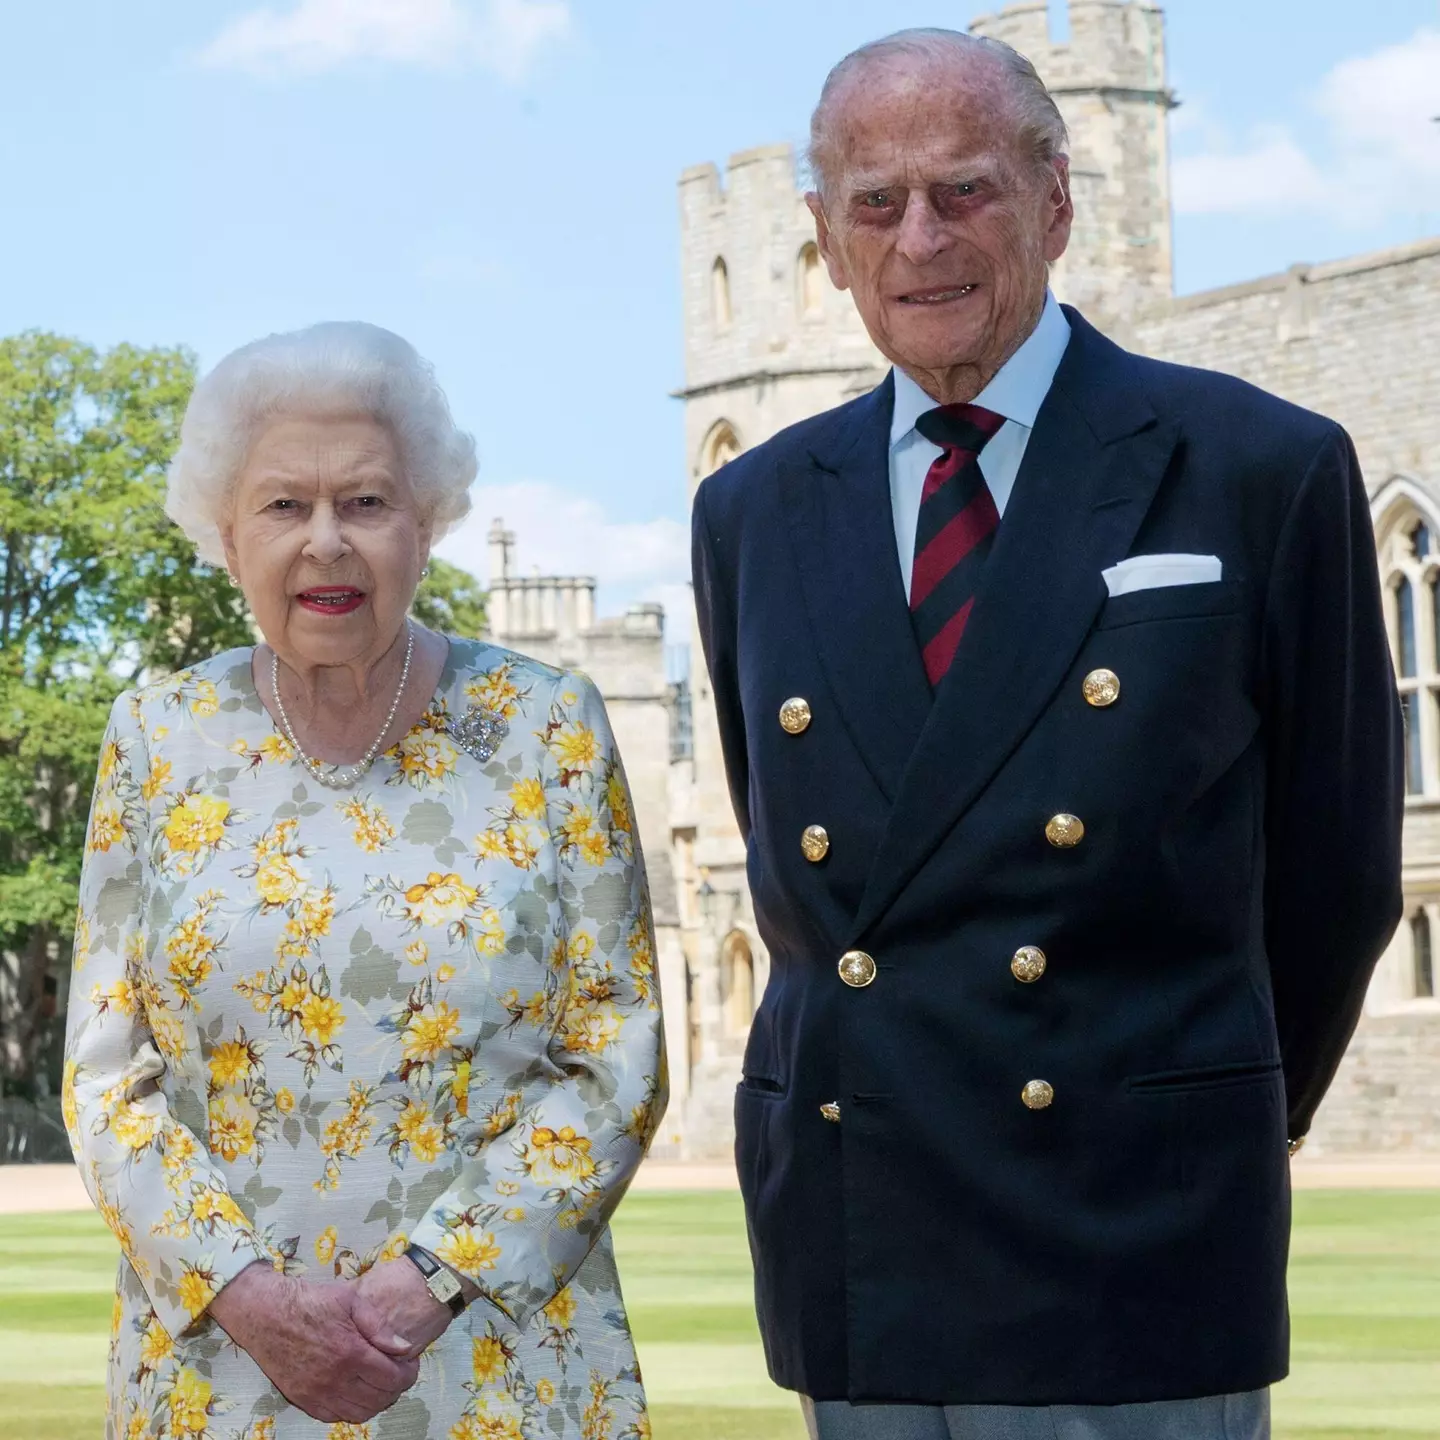 The Queen has been laid to rest alongside her husband, Prince Philip.